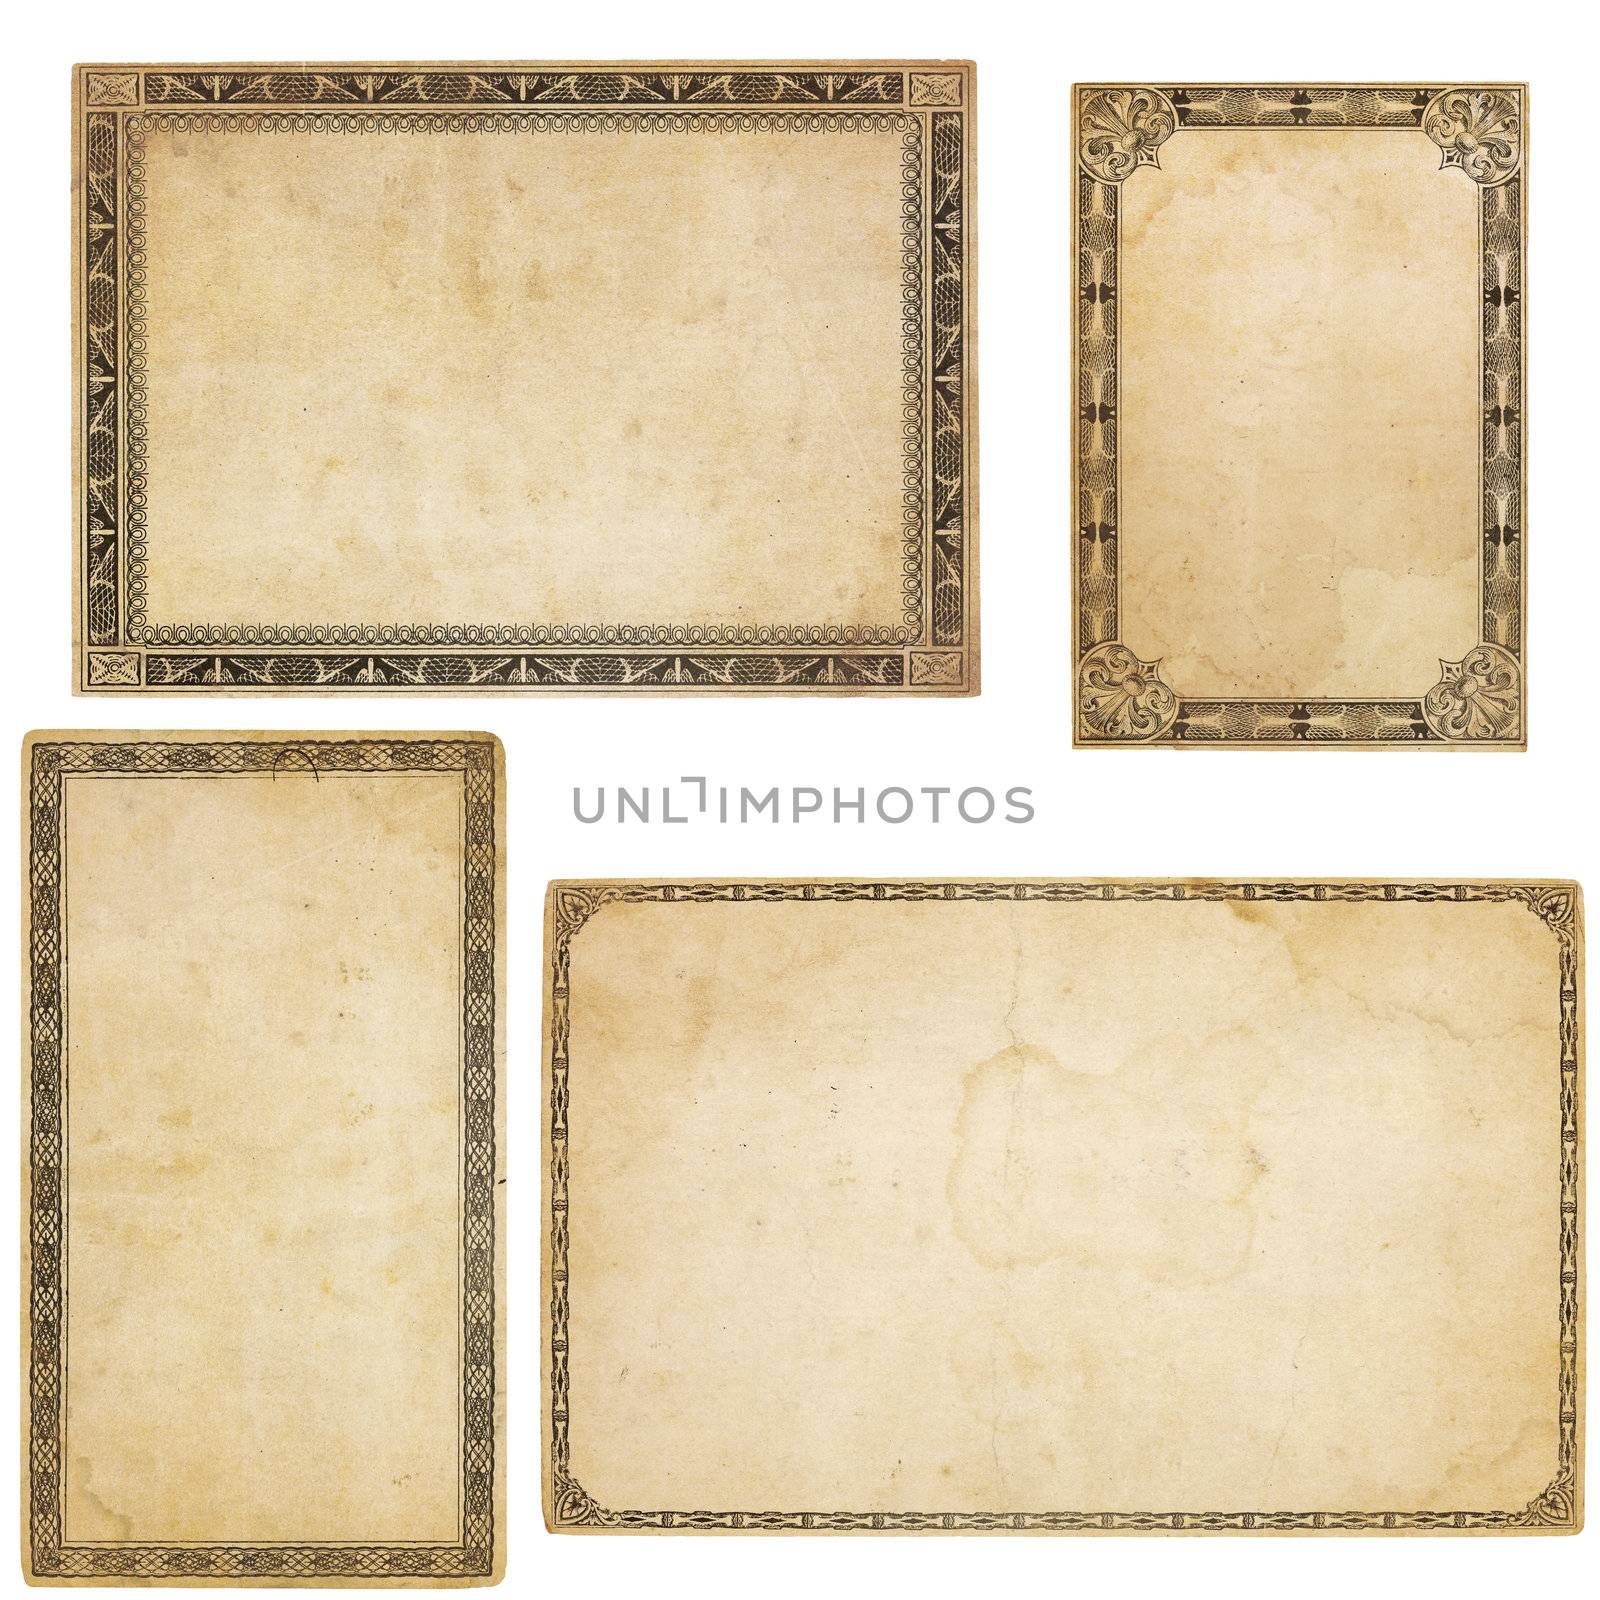 A set of four heavily aged blank cards with stains, creases and tears.  Each card has different, old-fashioned decorative border. Isolated on white. Includes clipping paths.